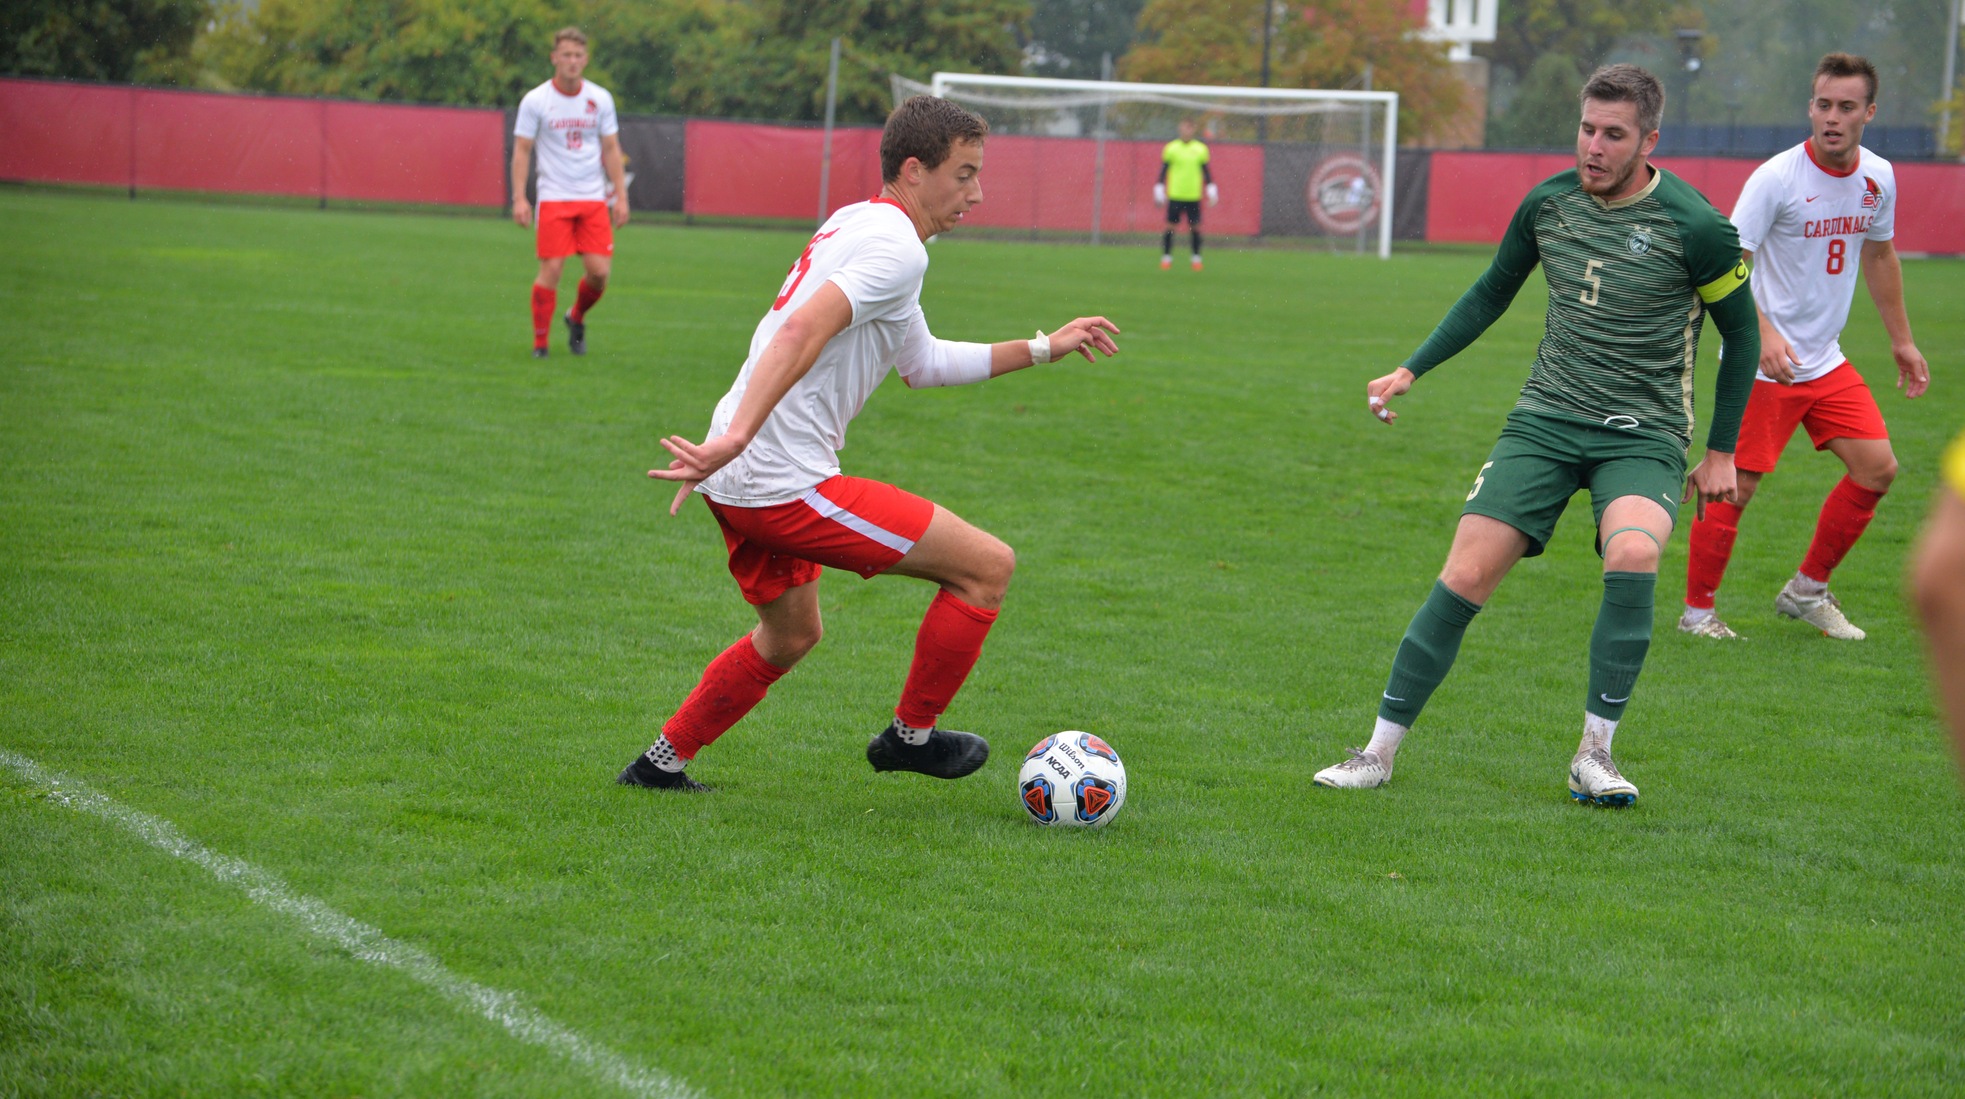 Cardinals and Dragons play to 0-0 draw in Friday action